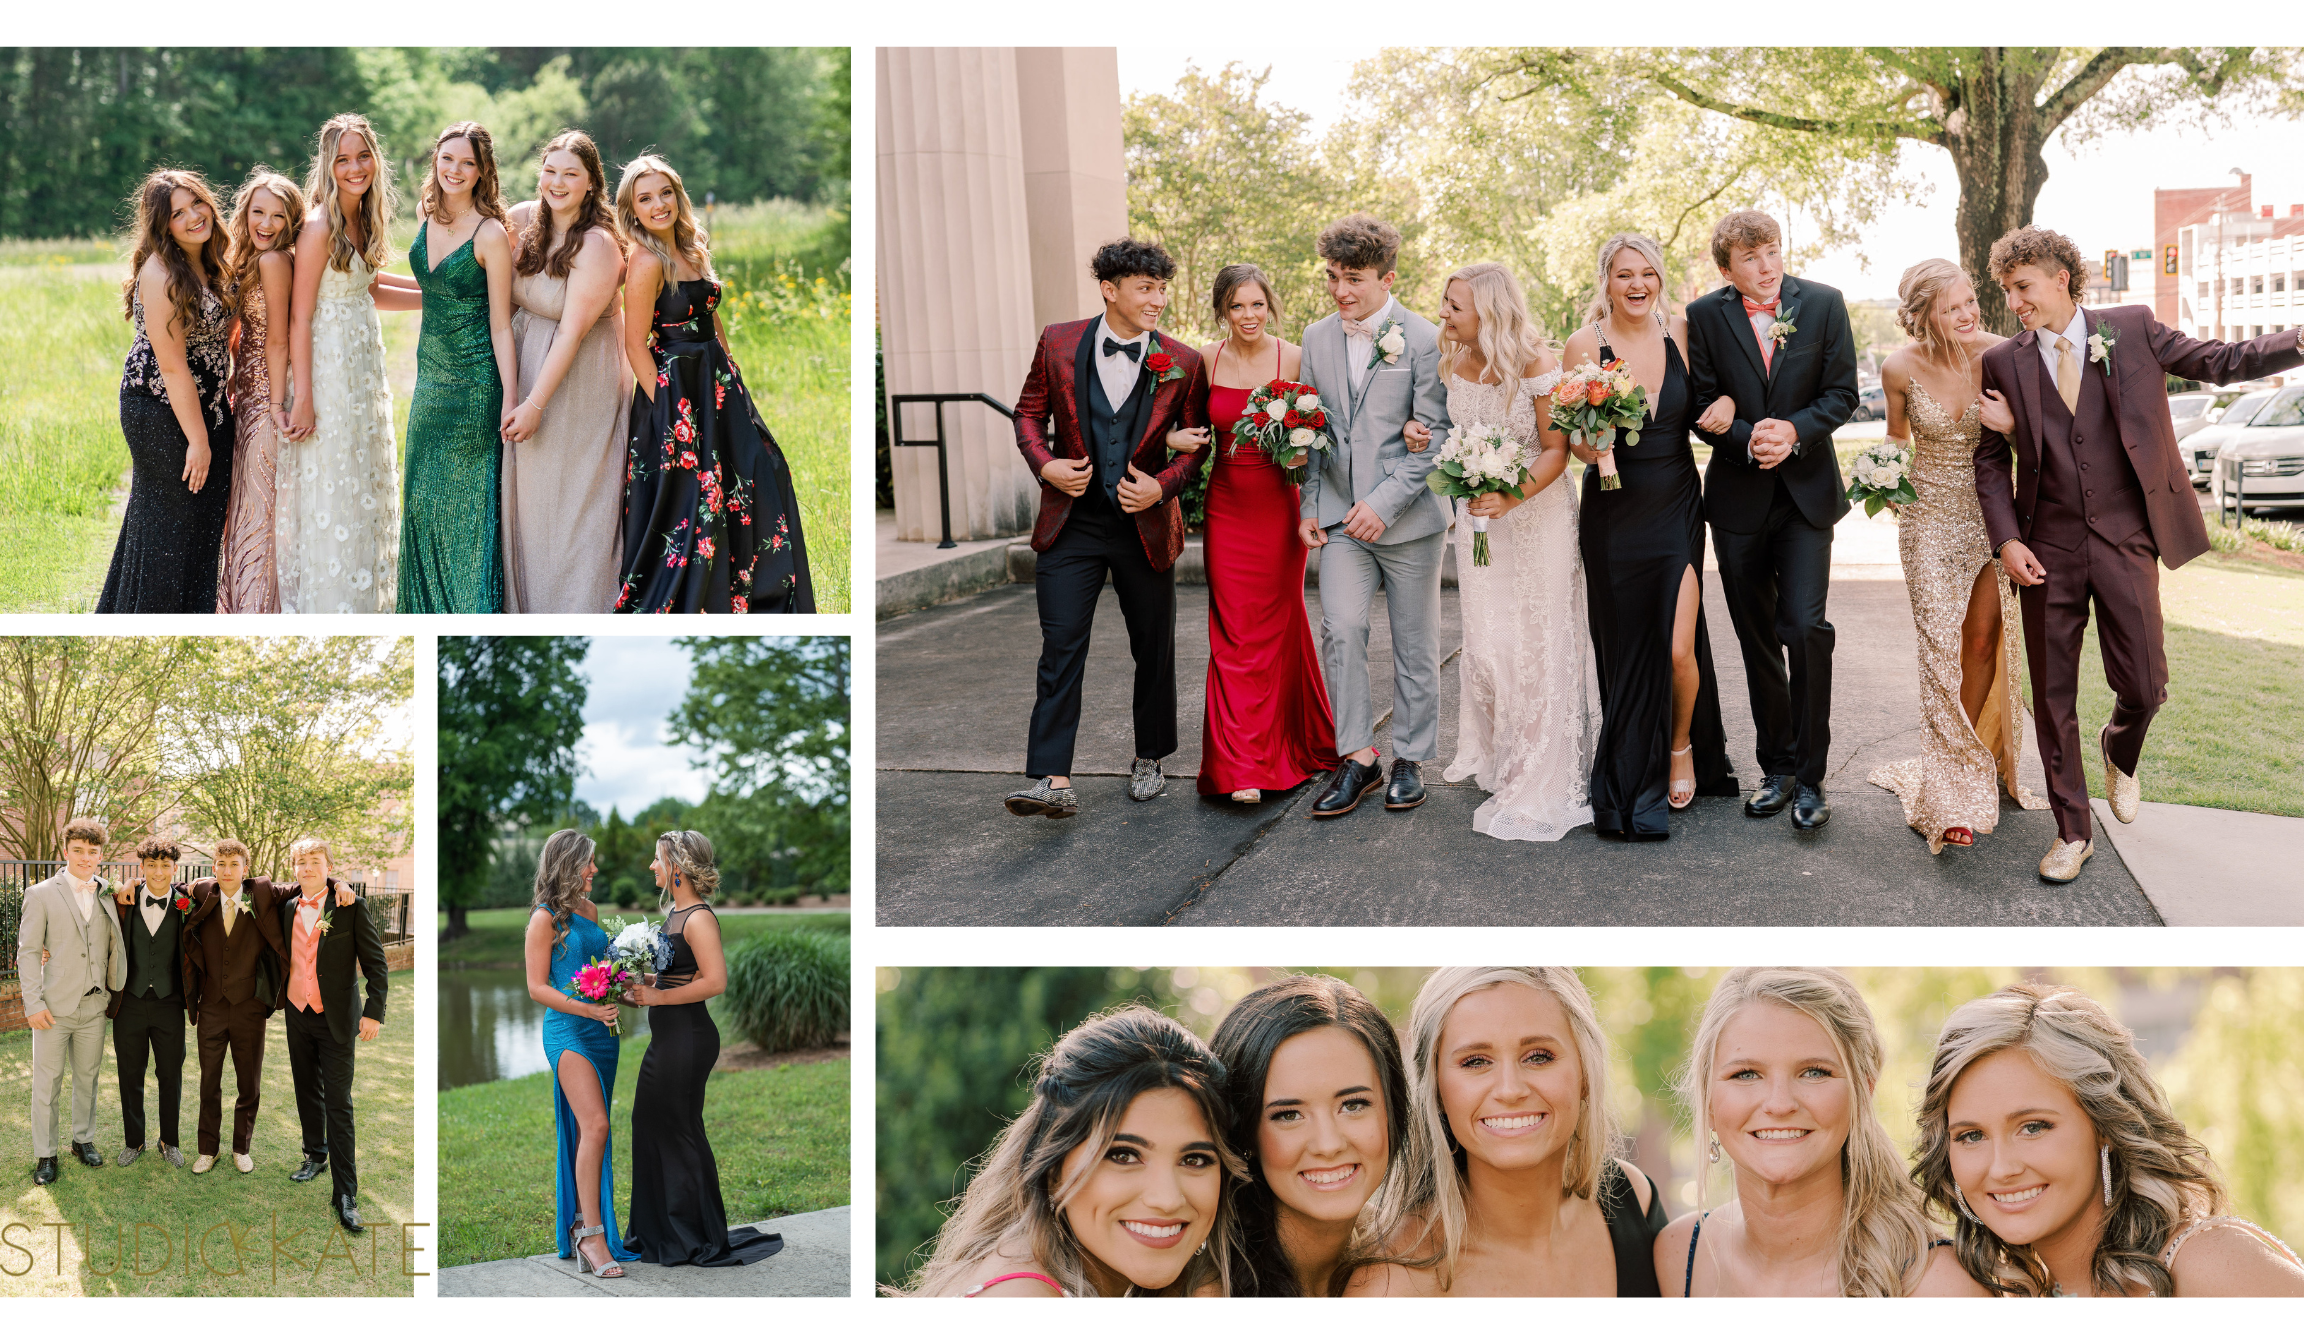 Prom detail photos. Top 5 photos to take at prom. Prom photo guide. rockmart georgia senior photographer. photos with friends at prom. how to take prom photos.